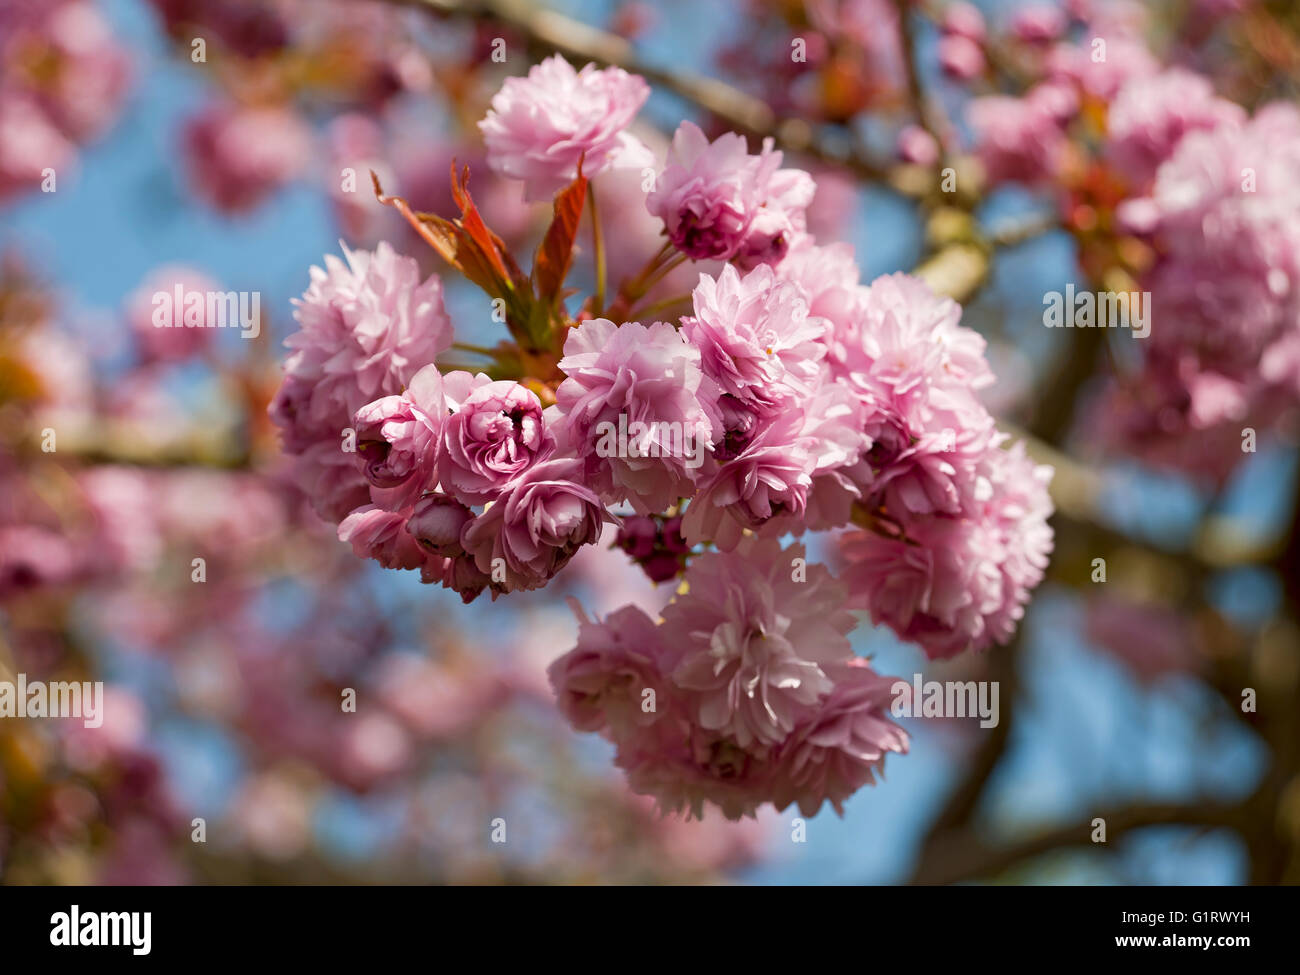 Close up of pink cherry tree blossom flowering flower flowers ornamental in spring England UK United Kingdom GB Great Britain Stock Photo